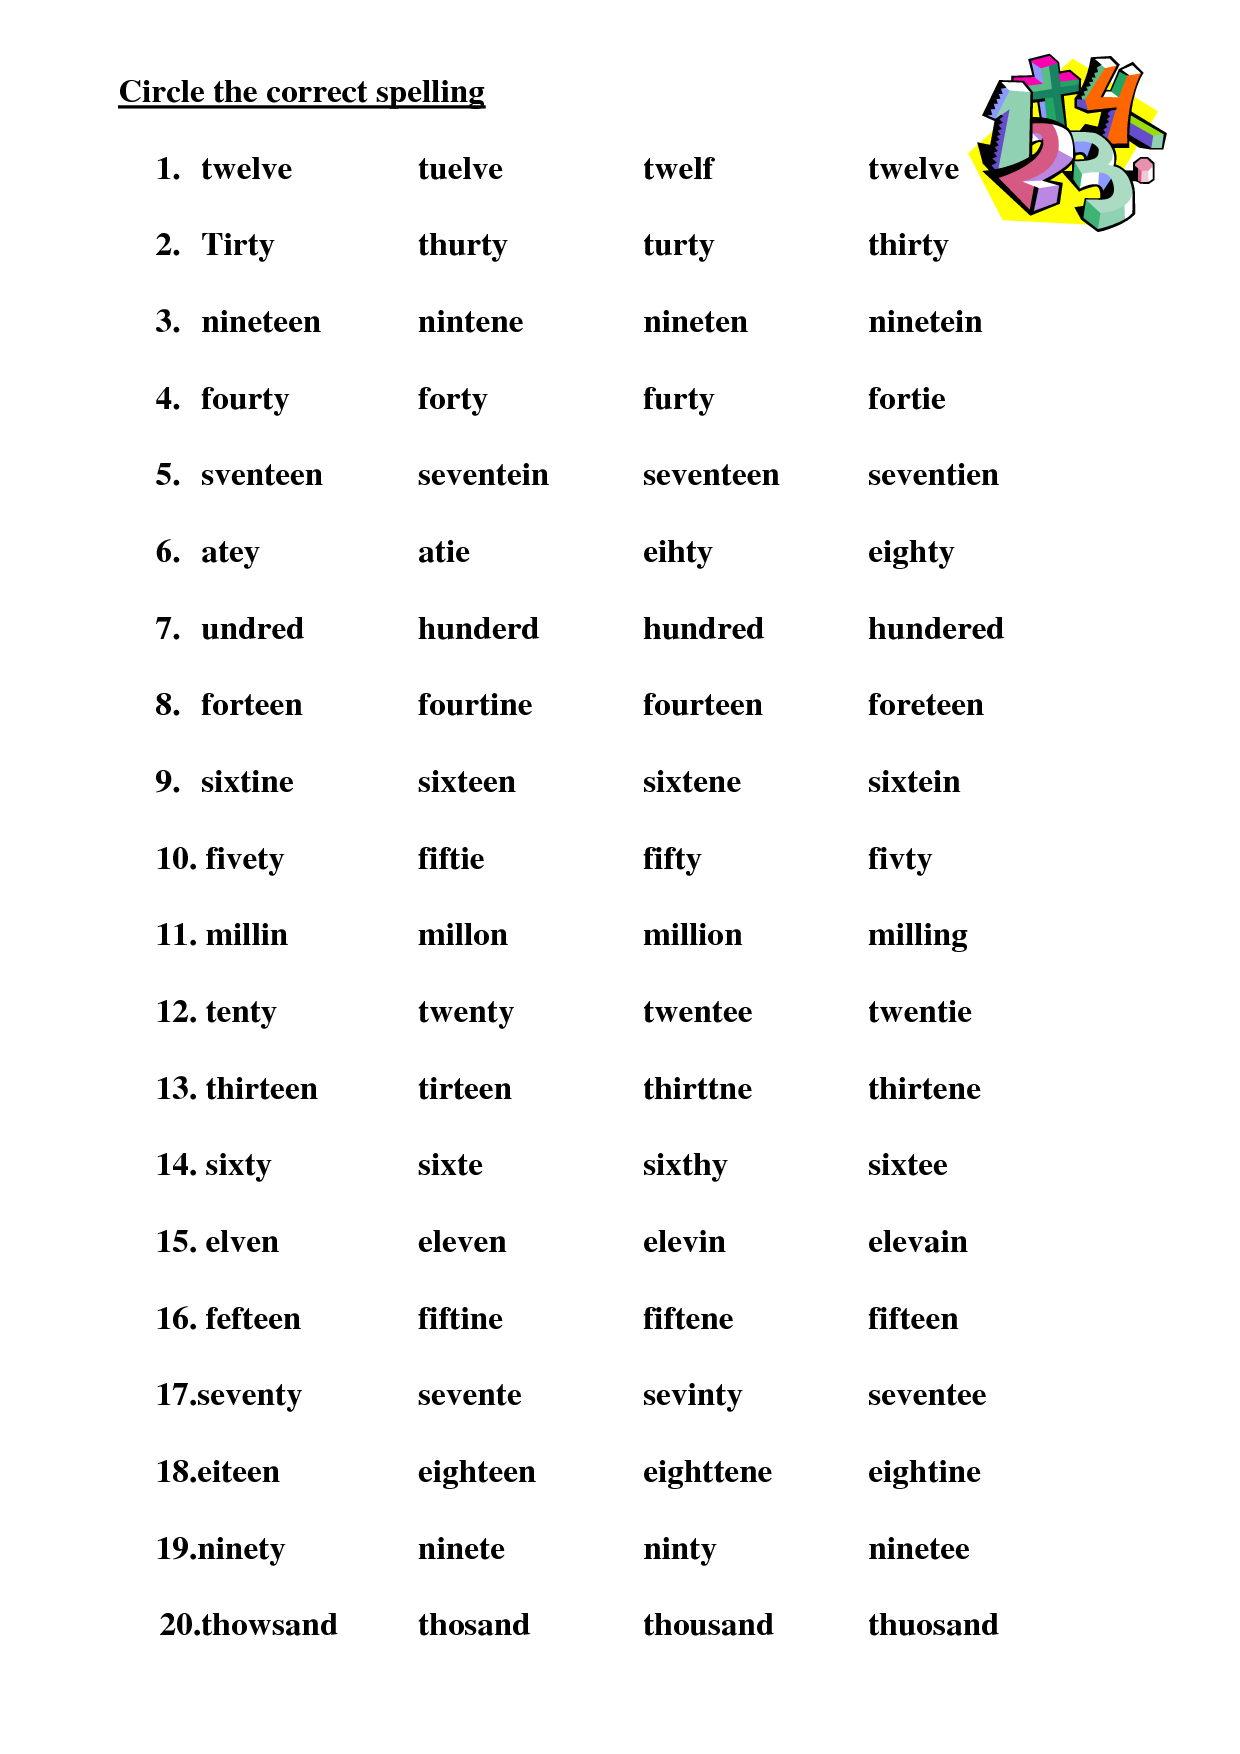 English Spelling Worksheet For Class 2